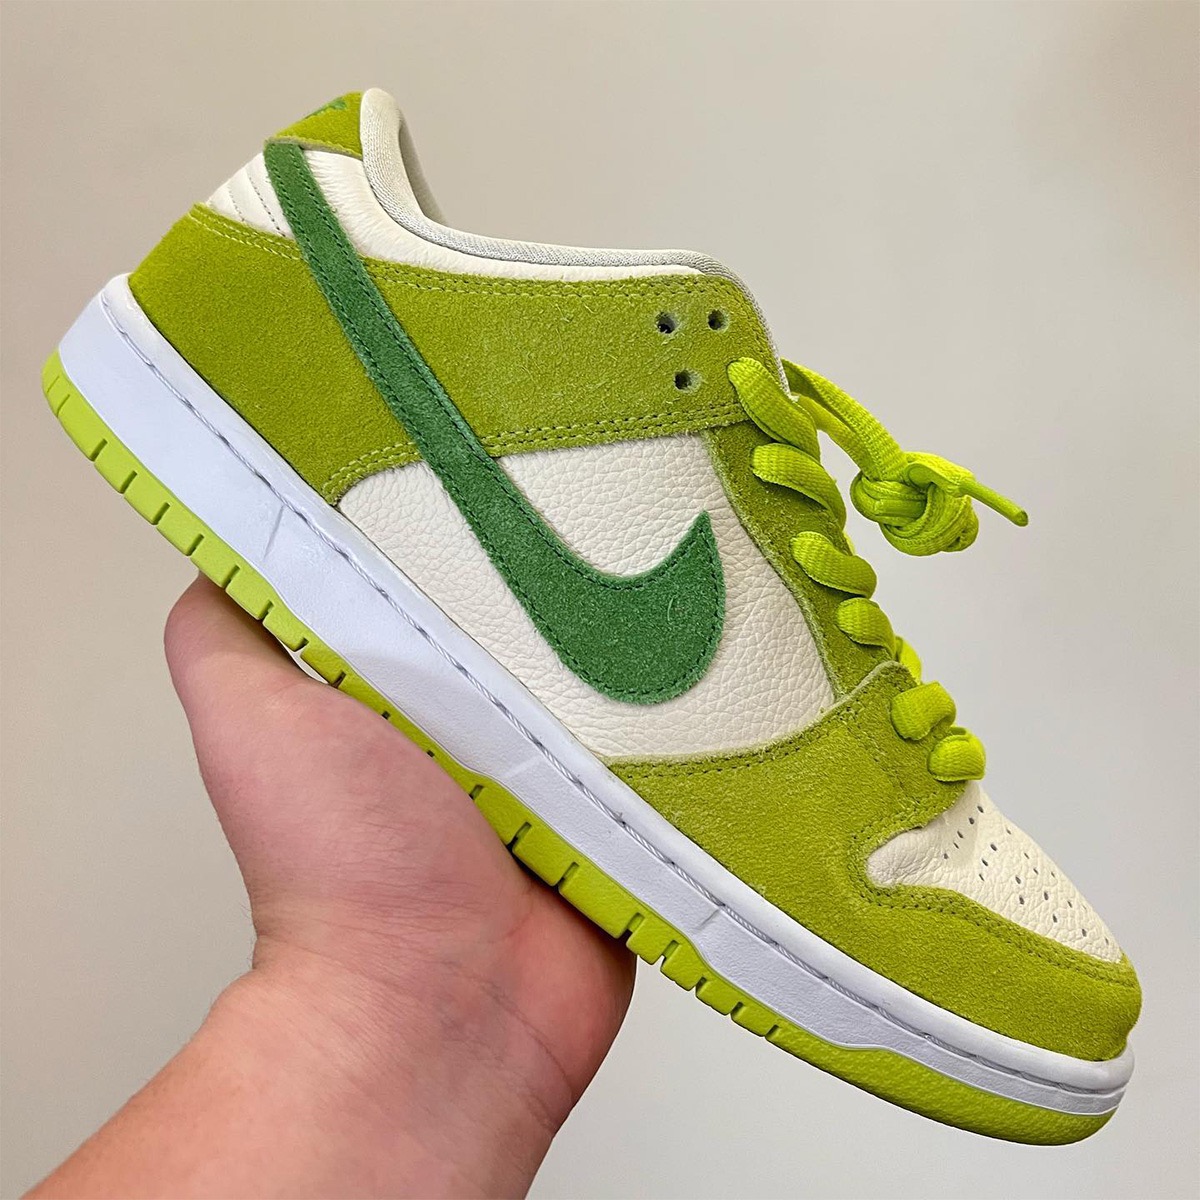 Nike SB Dunk Low & High Pro “Fruity Pack” Pineappleが国内6月9日 